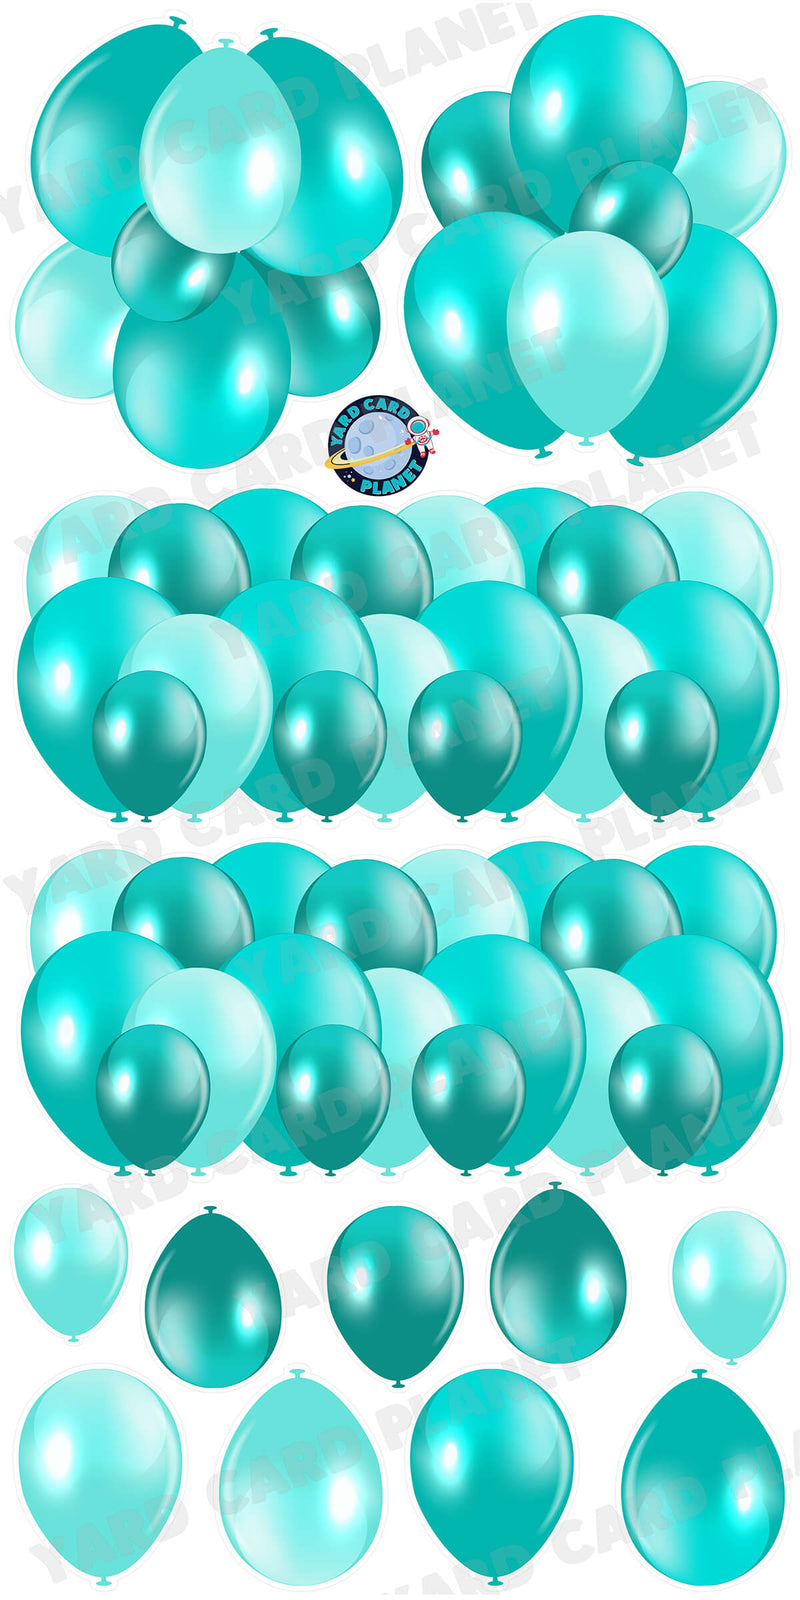 Teal Balloon Panels, Bouquets and Singles Yard Card Set